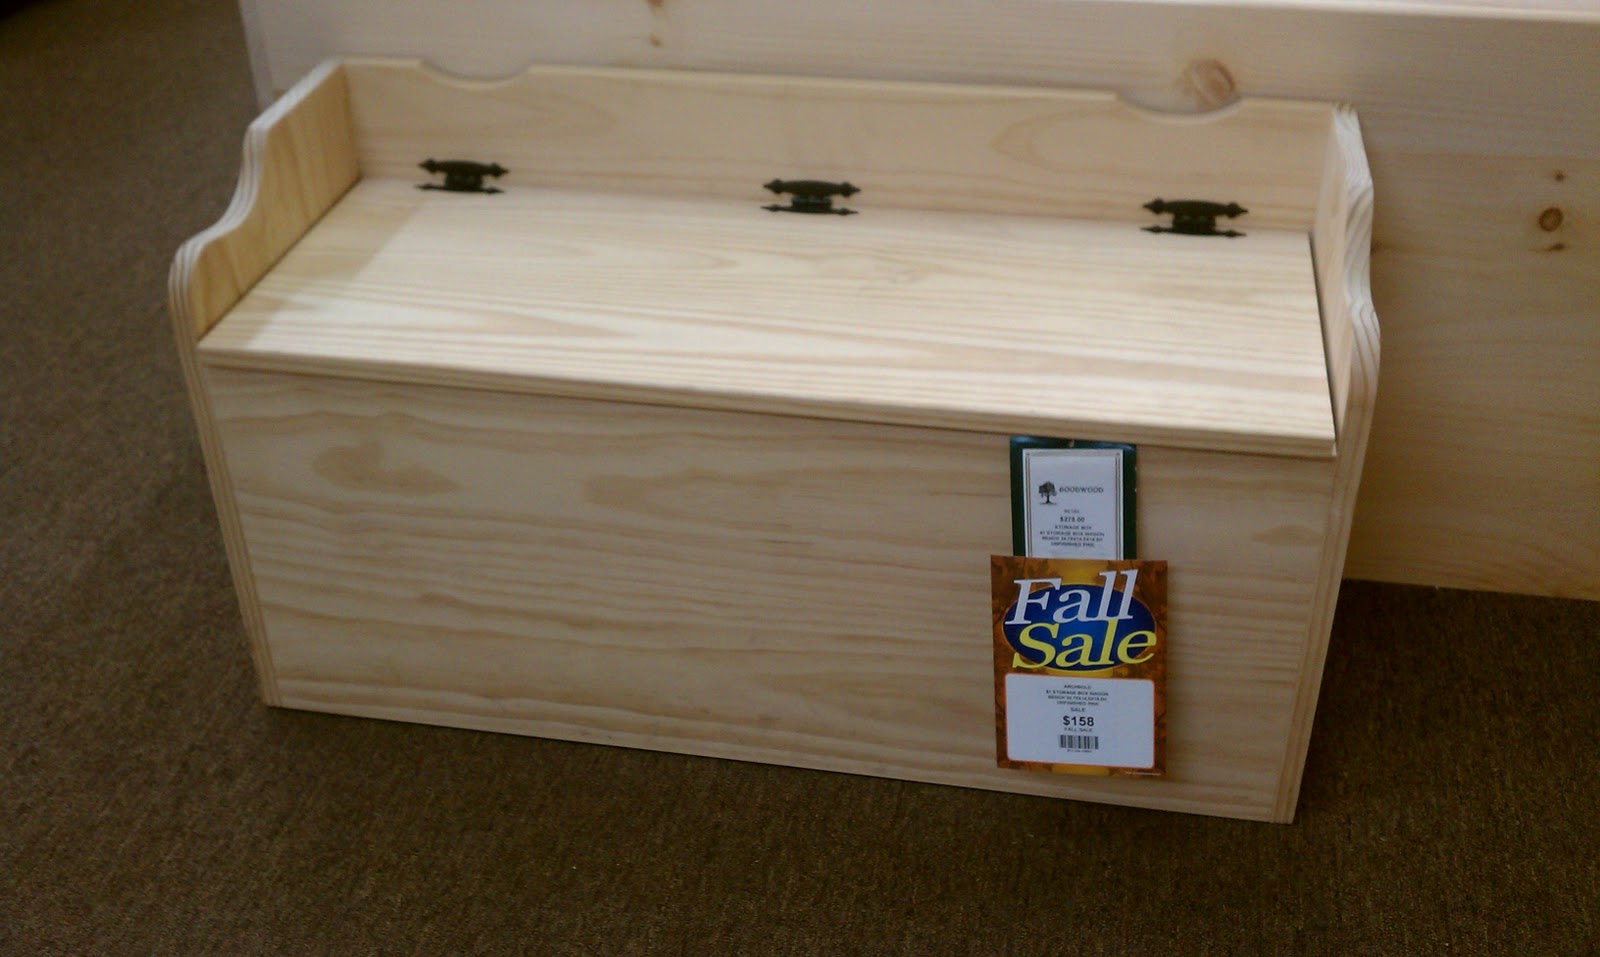 How to Build a Toy Chest